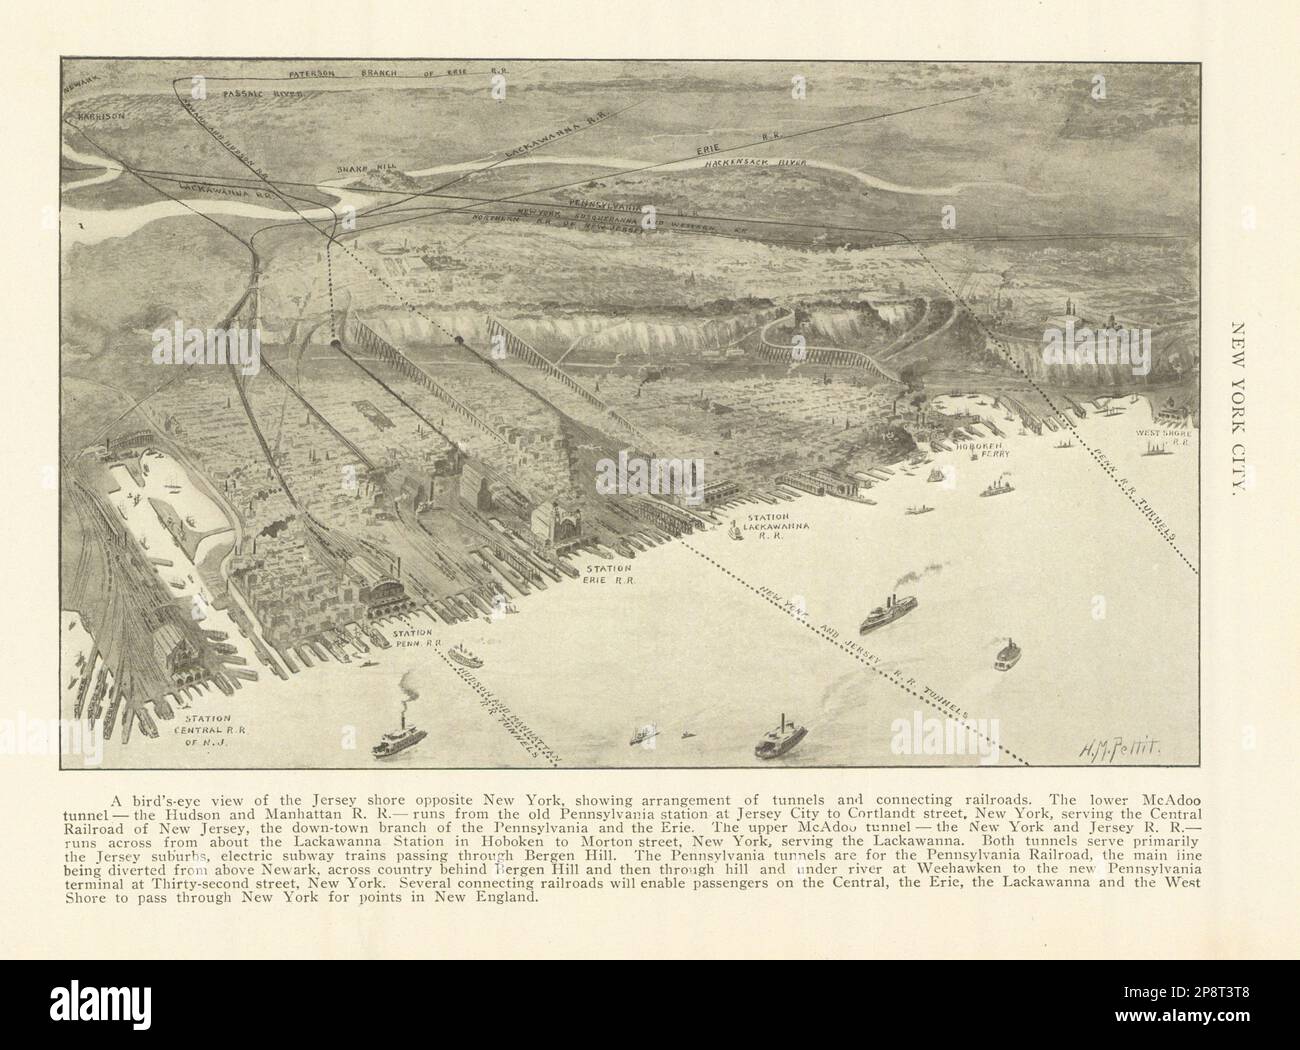 The Jersey shore opposite New York City showing tunnels & railroads 1907 print Stock Photo